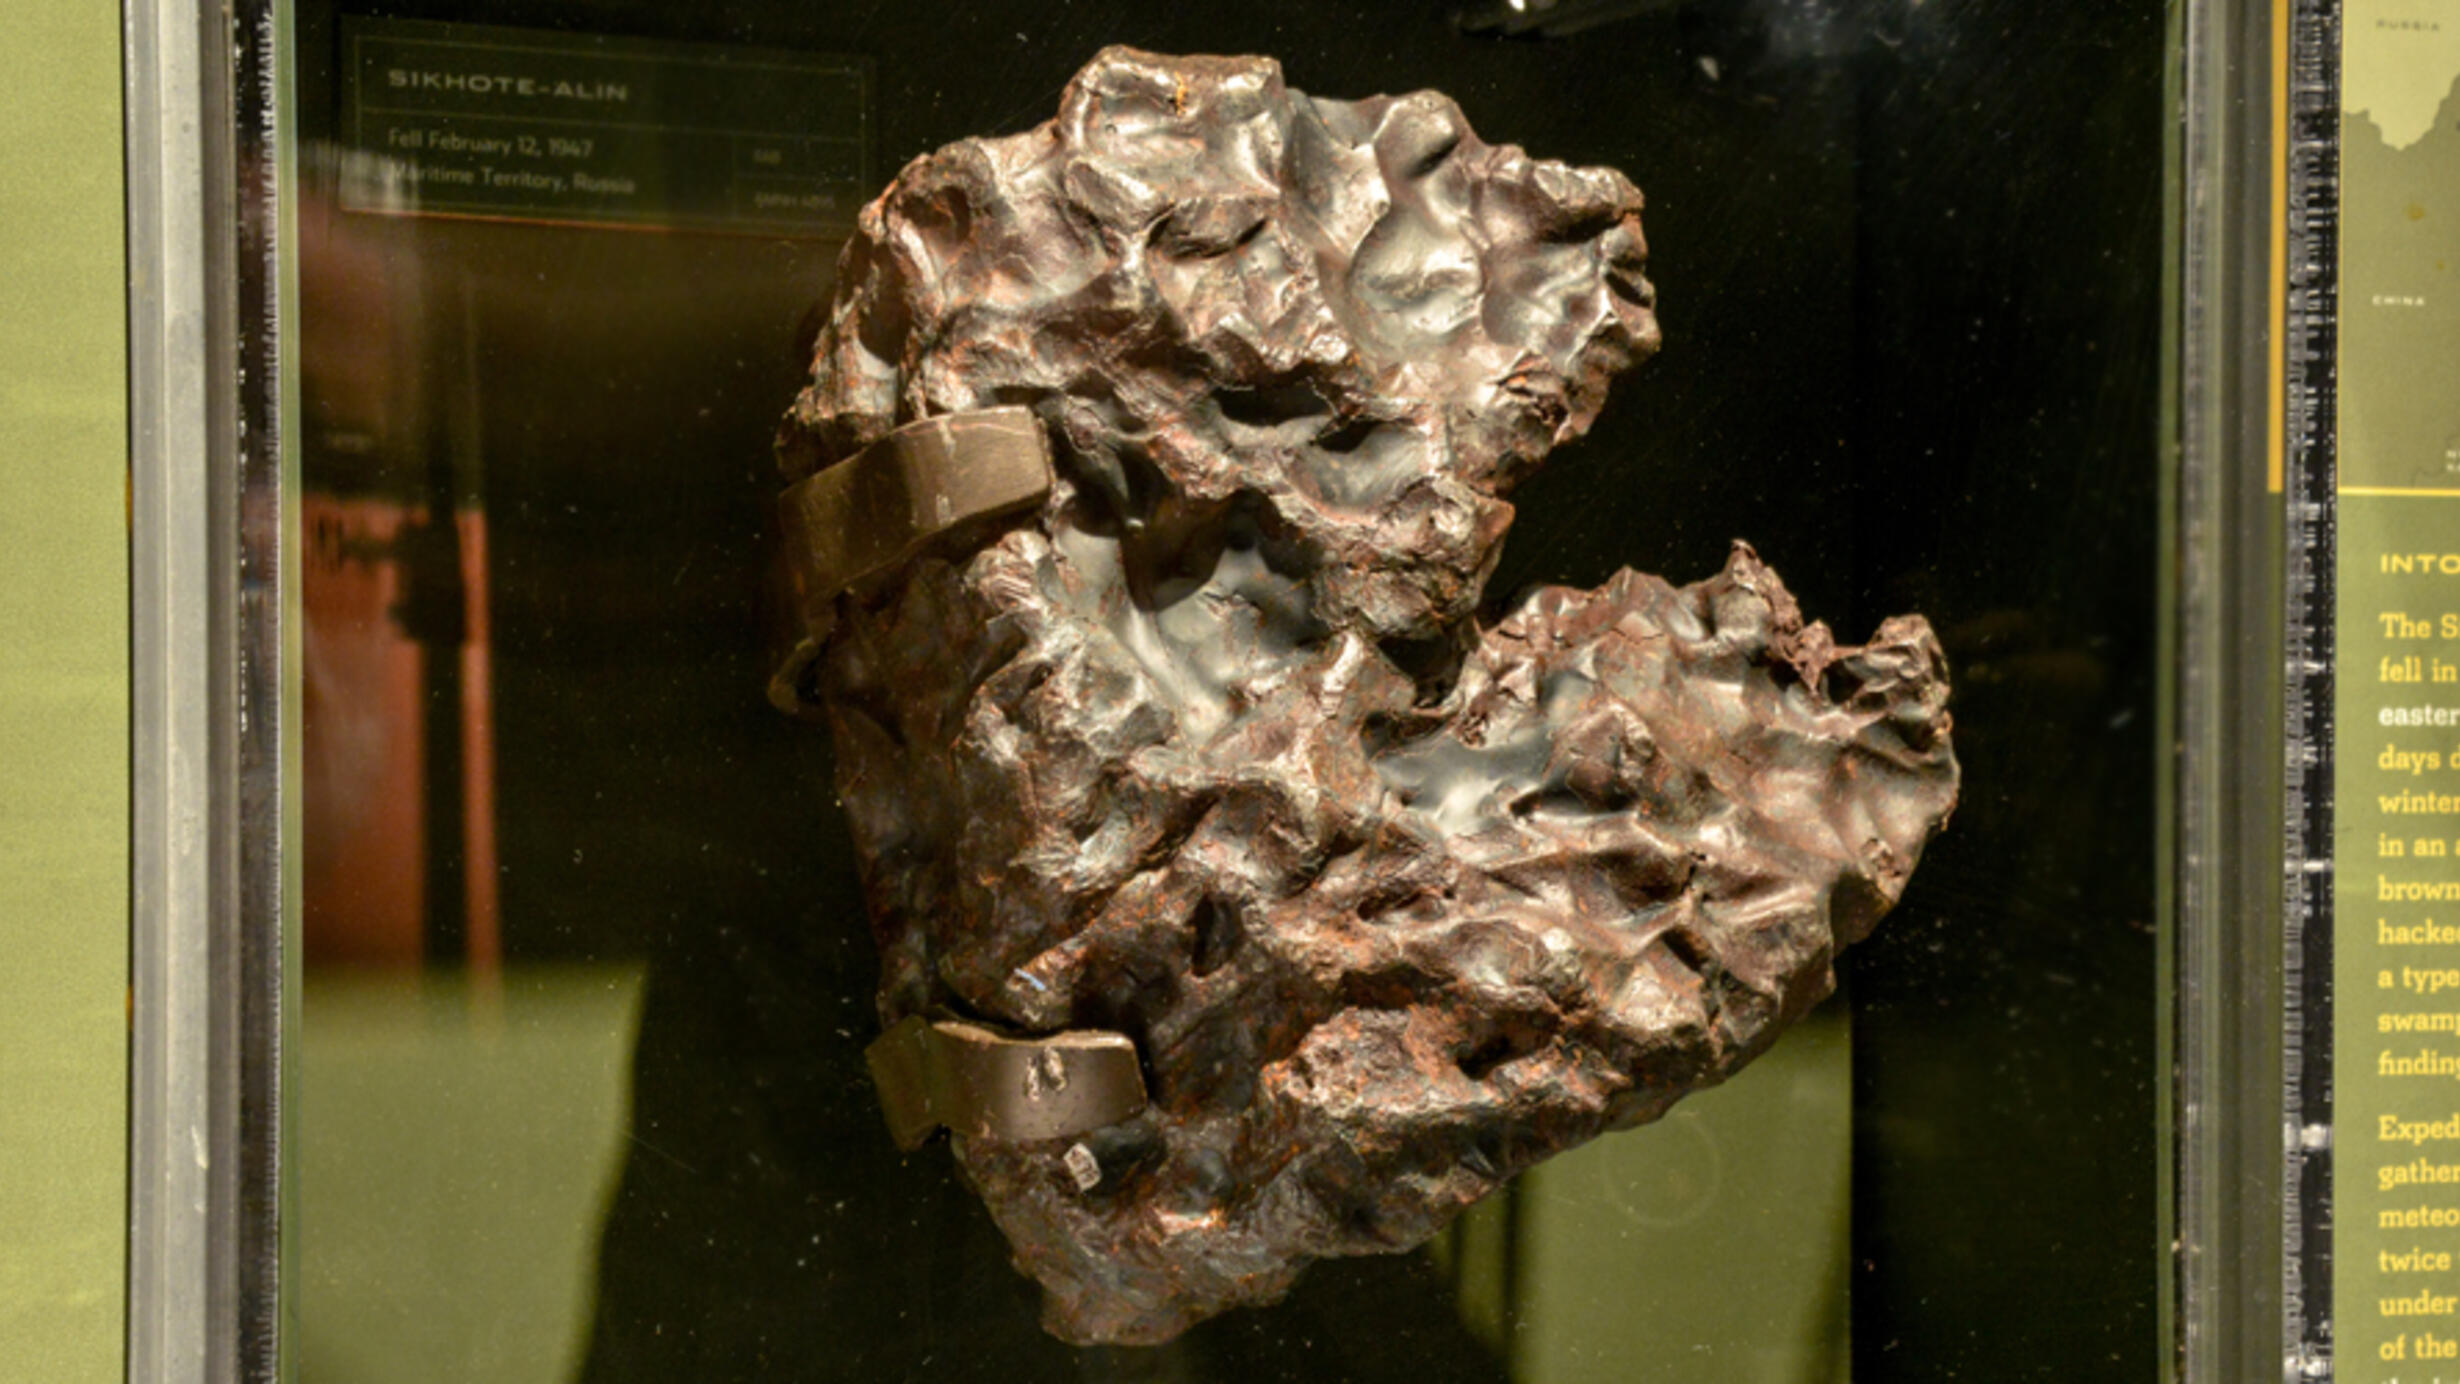 Mounted in the Museum’s Hall of Meteorites, the Sikhote-Alin meteorite which fell in Russia in 1947. It has a bumpy pitted surface.